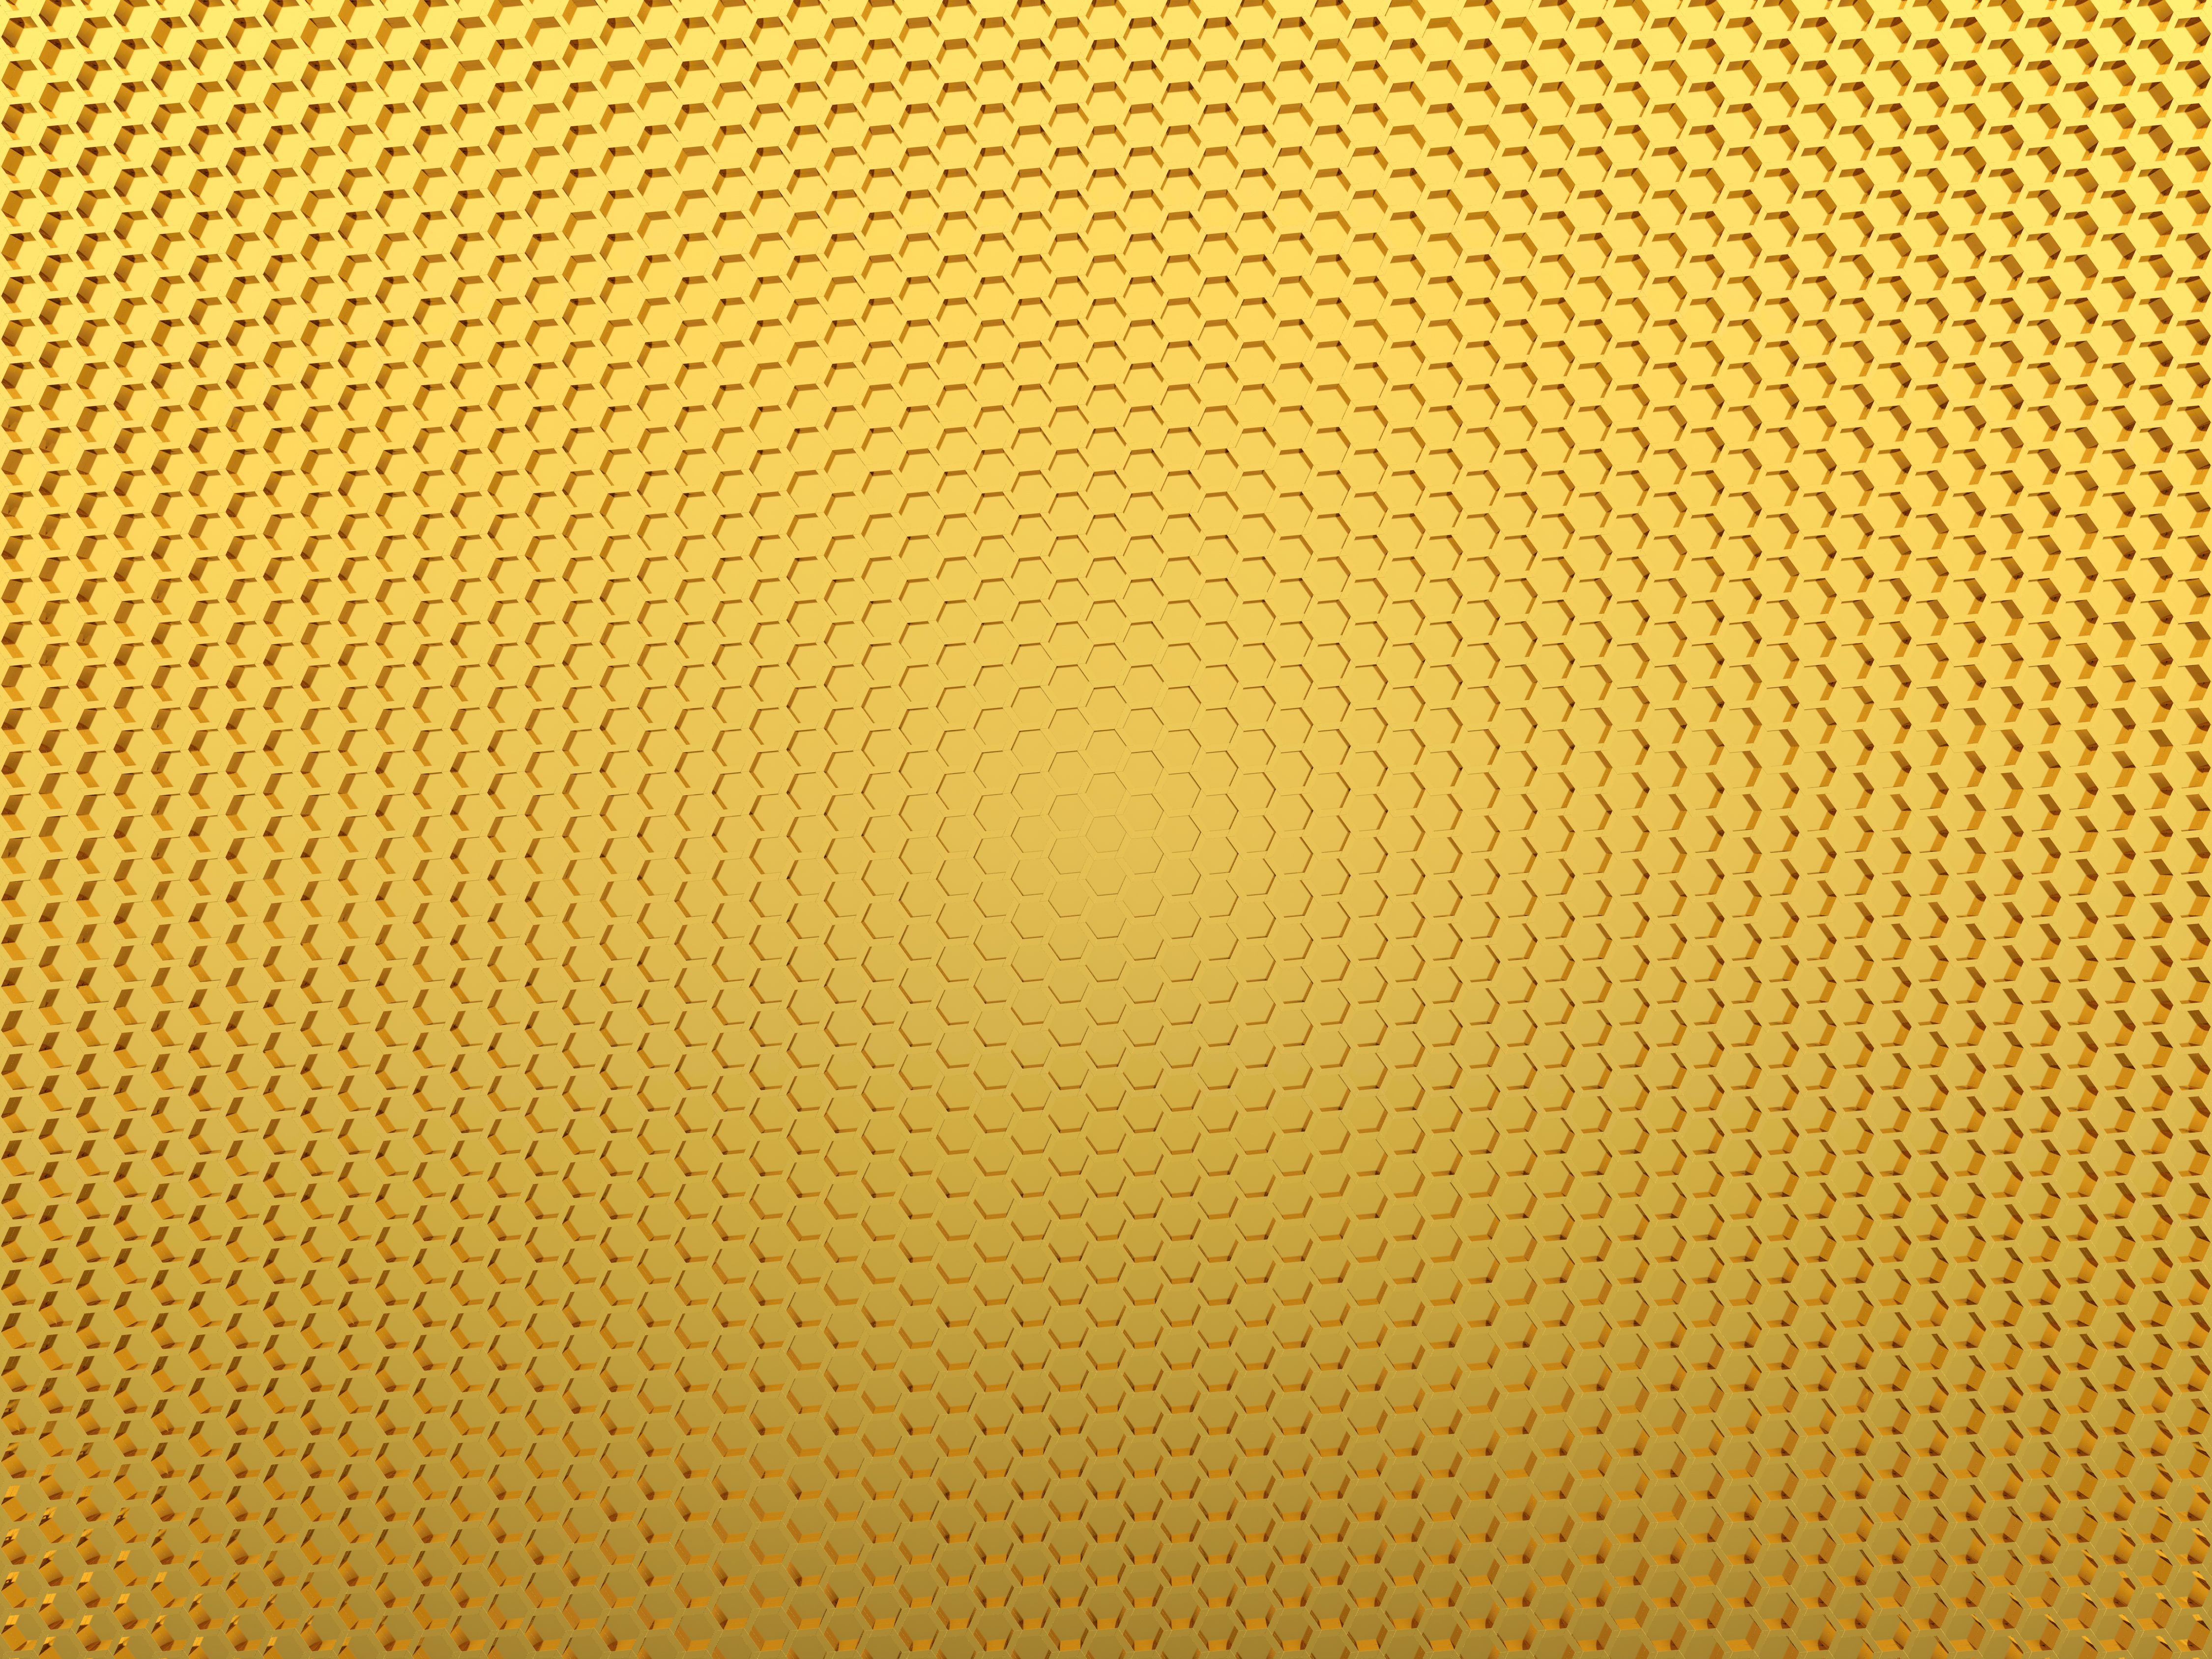 Abstract background of honeycomb made of gold